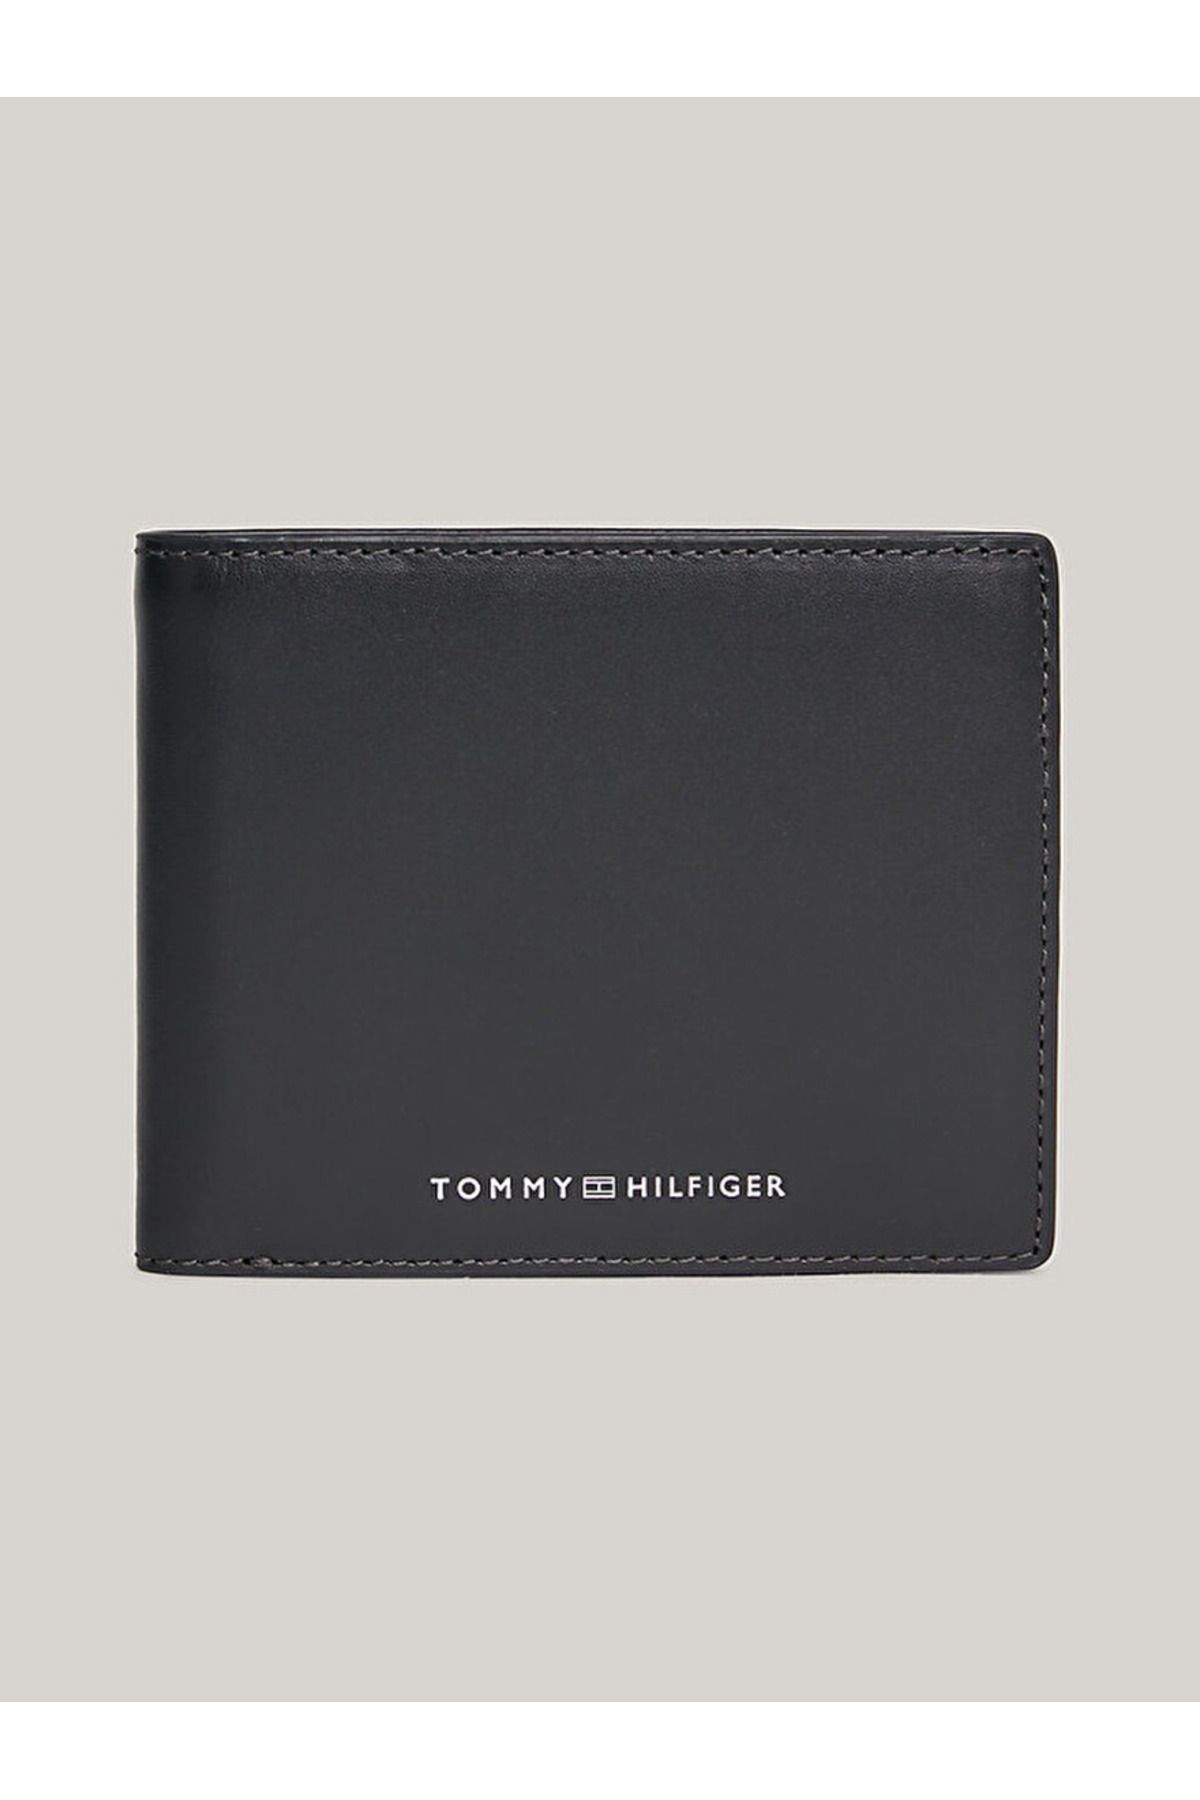 Tommy Hilfiger Leather Coin And Credit Card Wallet